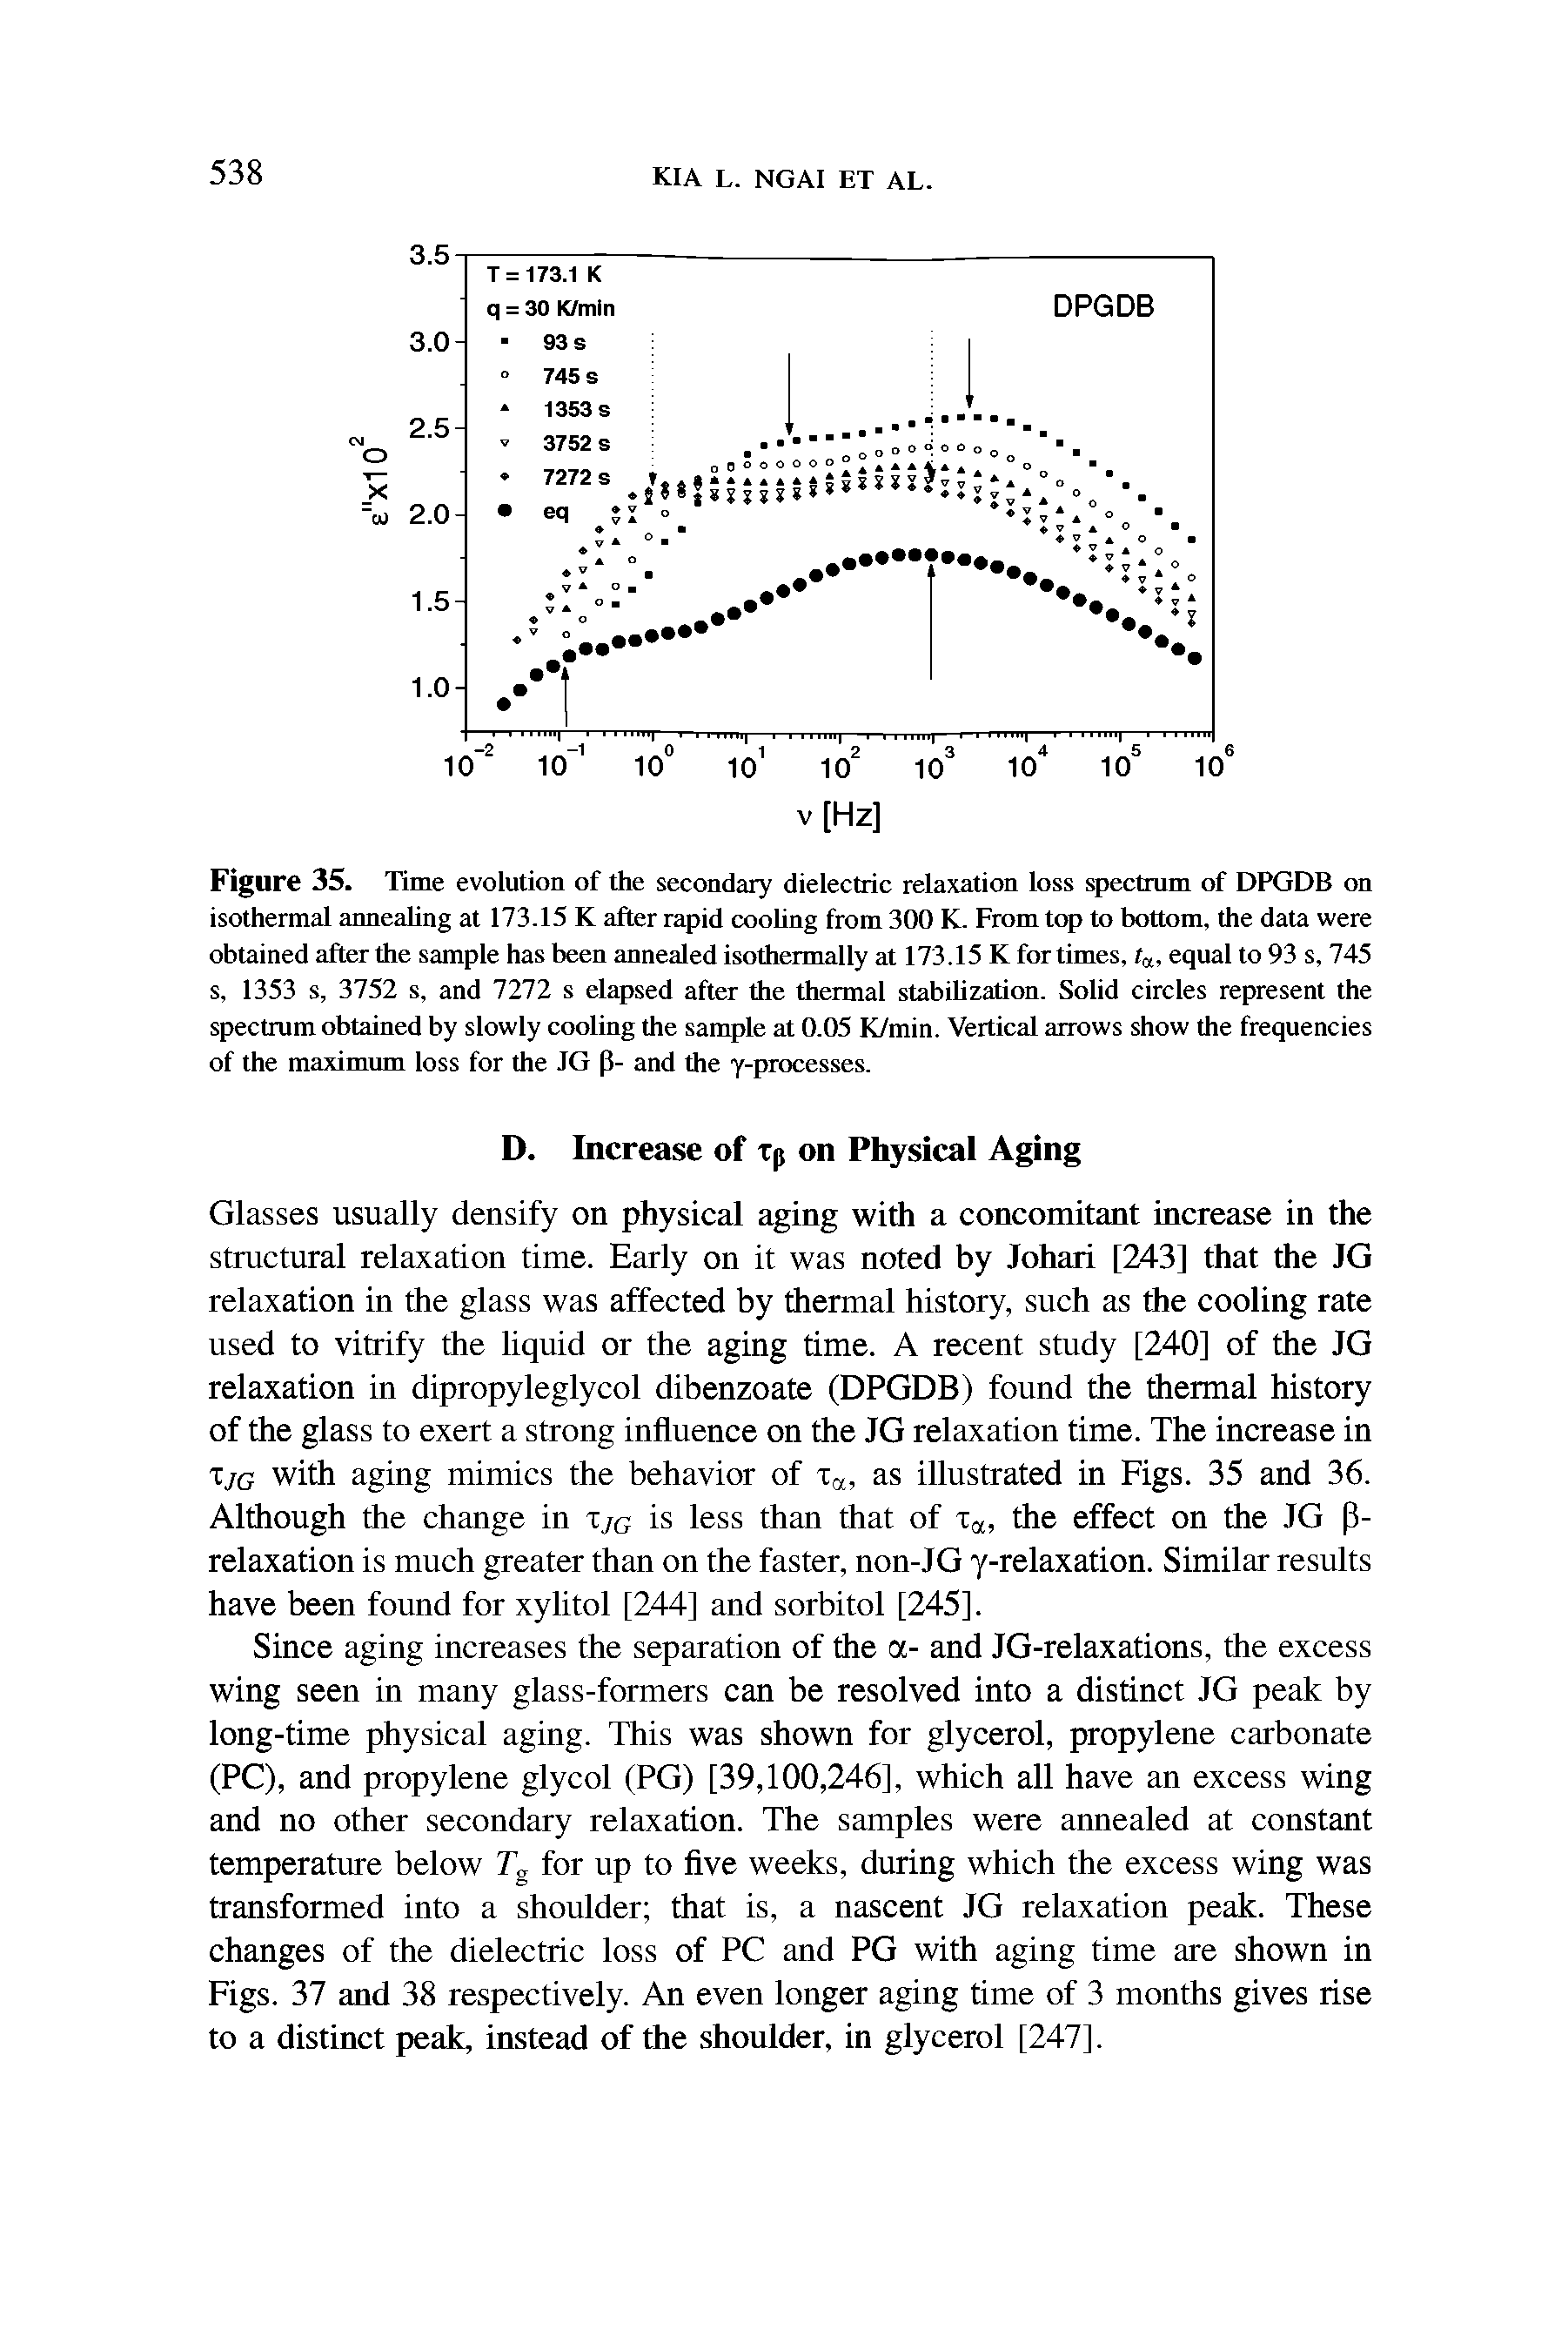 Figure 35. Time evolution of the secondary dielectric relaxation loss spectrum of DPGDB on isothermal annealing at 173.15 K after rapid cooling from 300 K. From top to bottom, the data were obtained after the sample has been annealed isothermally at 173.15 K for times, ta, equal to 93 s, 745 s, 1353 s, 3752 s, and 7272 s elapsed after the thermal stabilization. Solid circles represent the spectrum obtained by slowly cooling the sample at 0.05 K/min. Vertical arrows show the frequencies of the maximum loss for the JG P- and the y-processes.